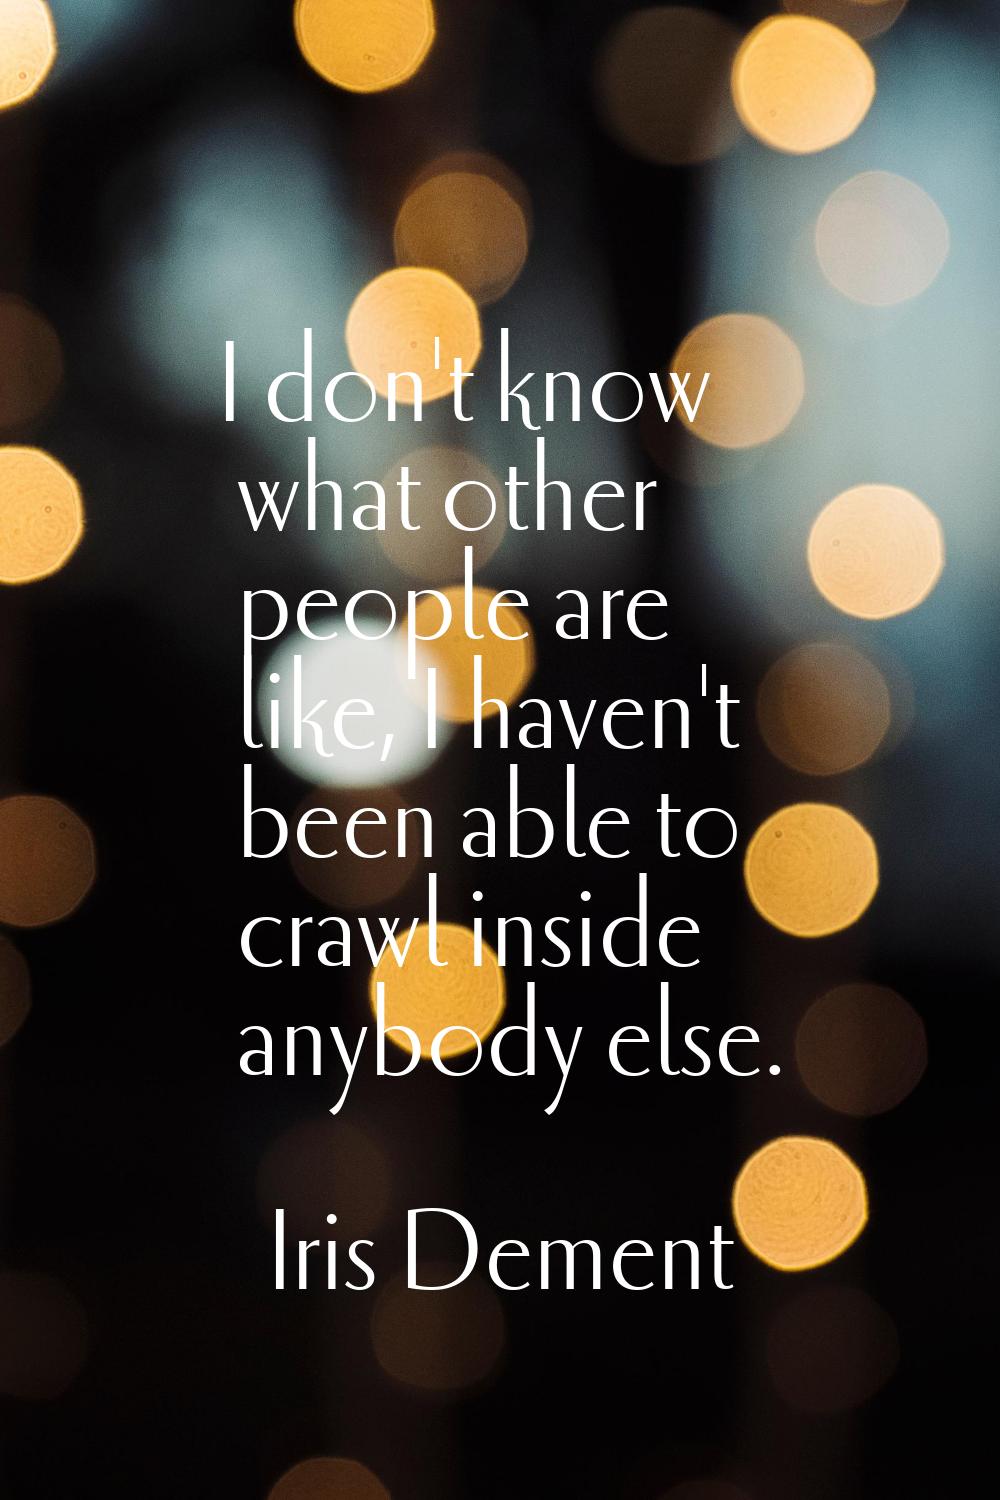 I don't know what other people are like, I haven't been able to crawl inside anybody else.